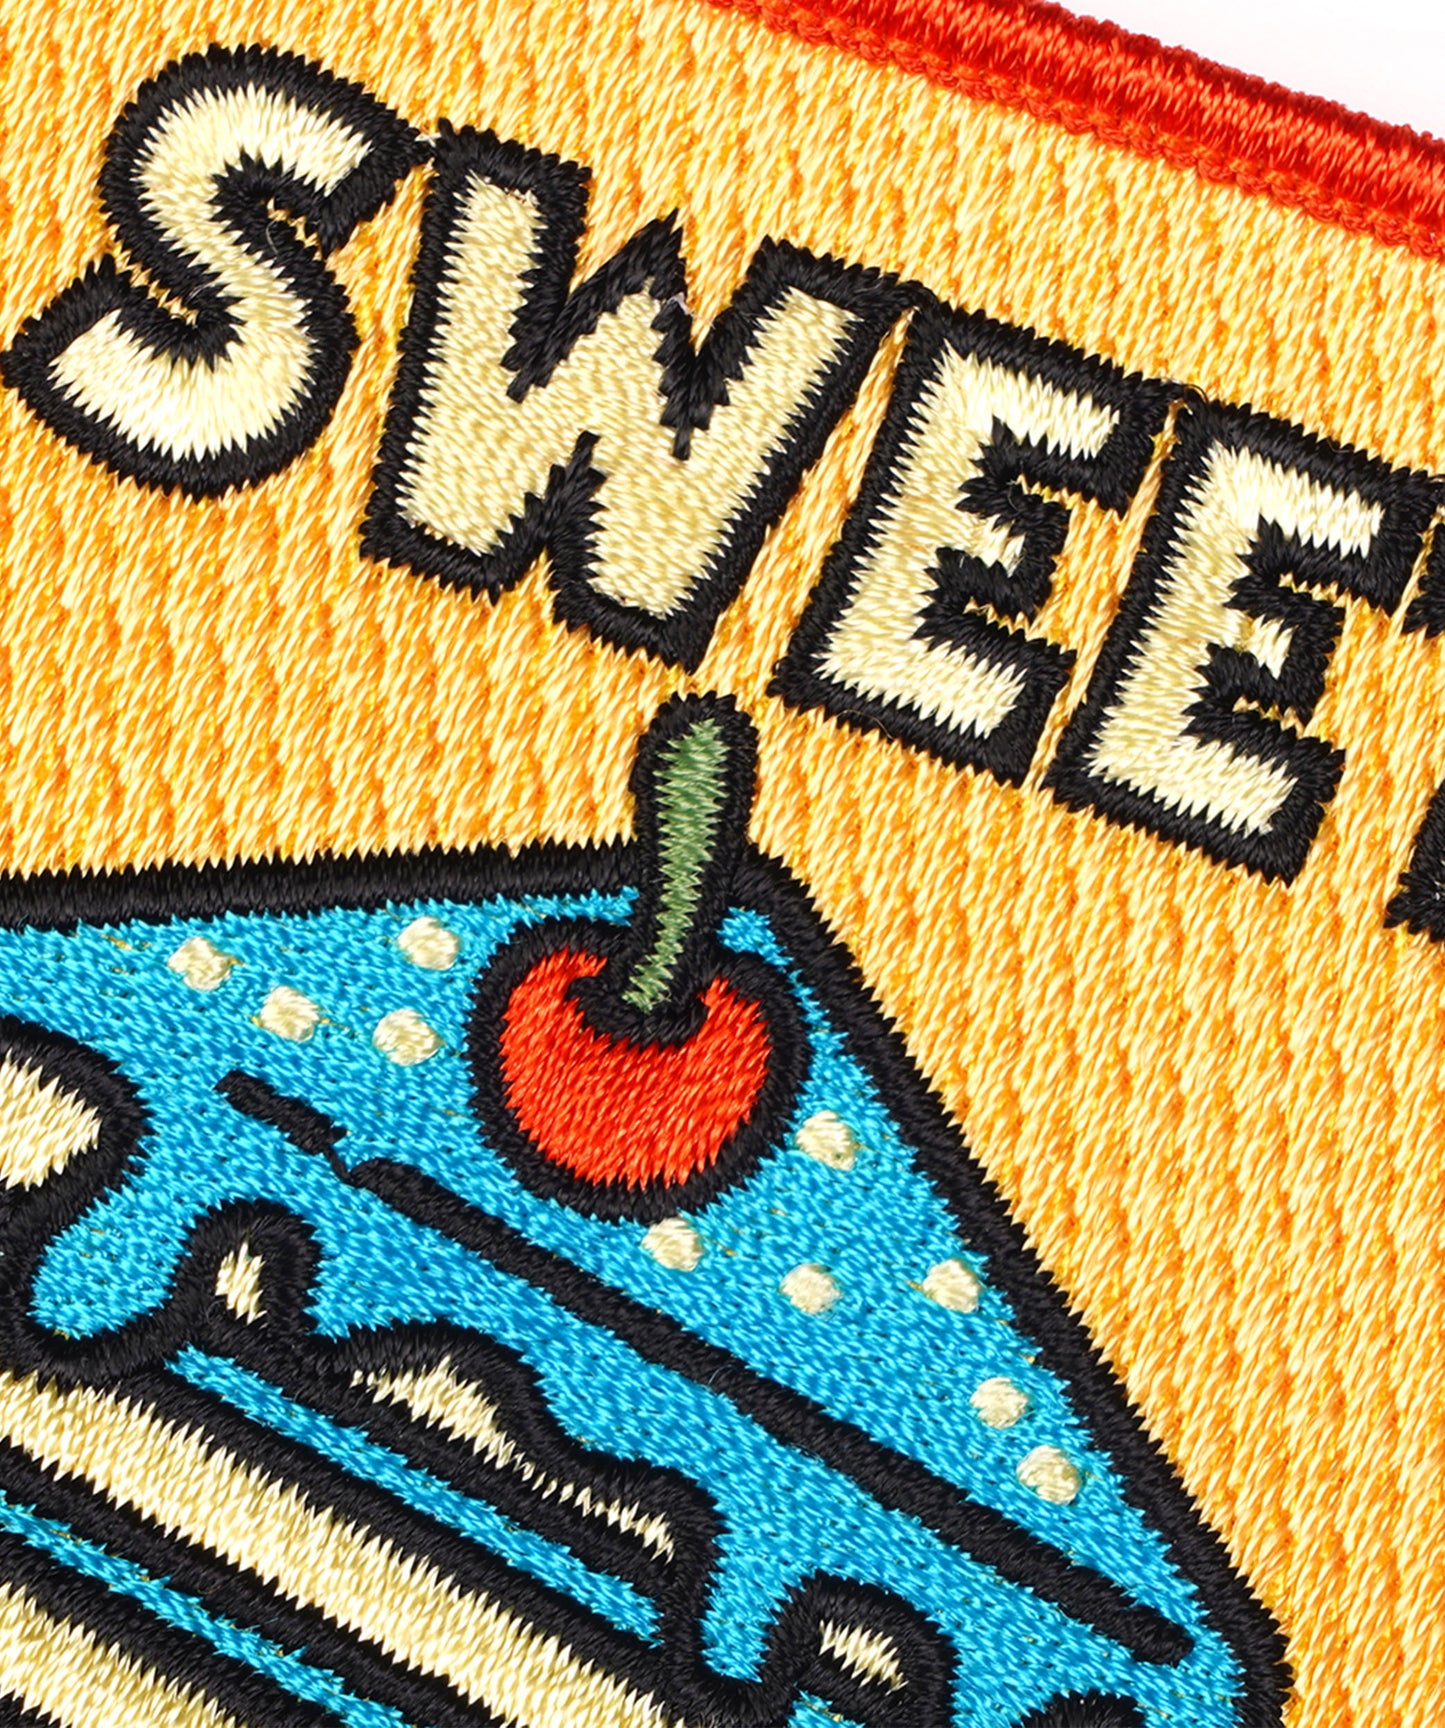 Sweet Treat Embroidered Patch